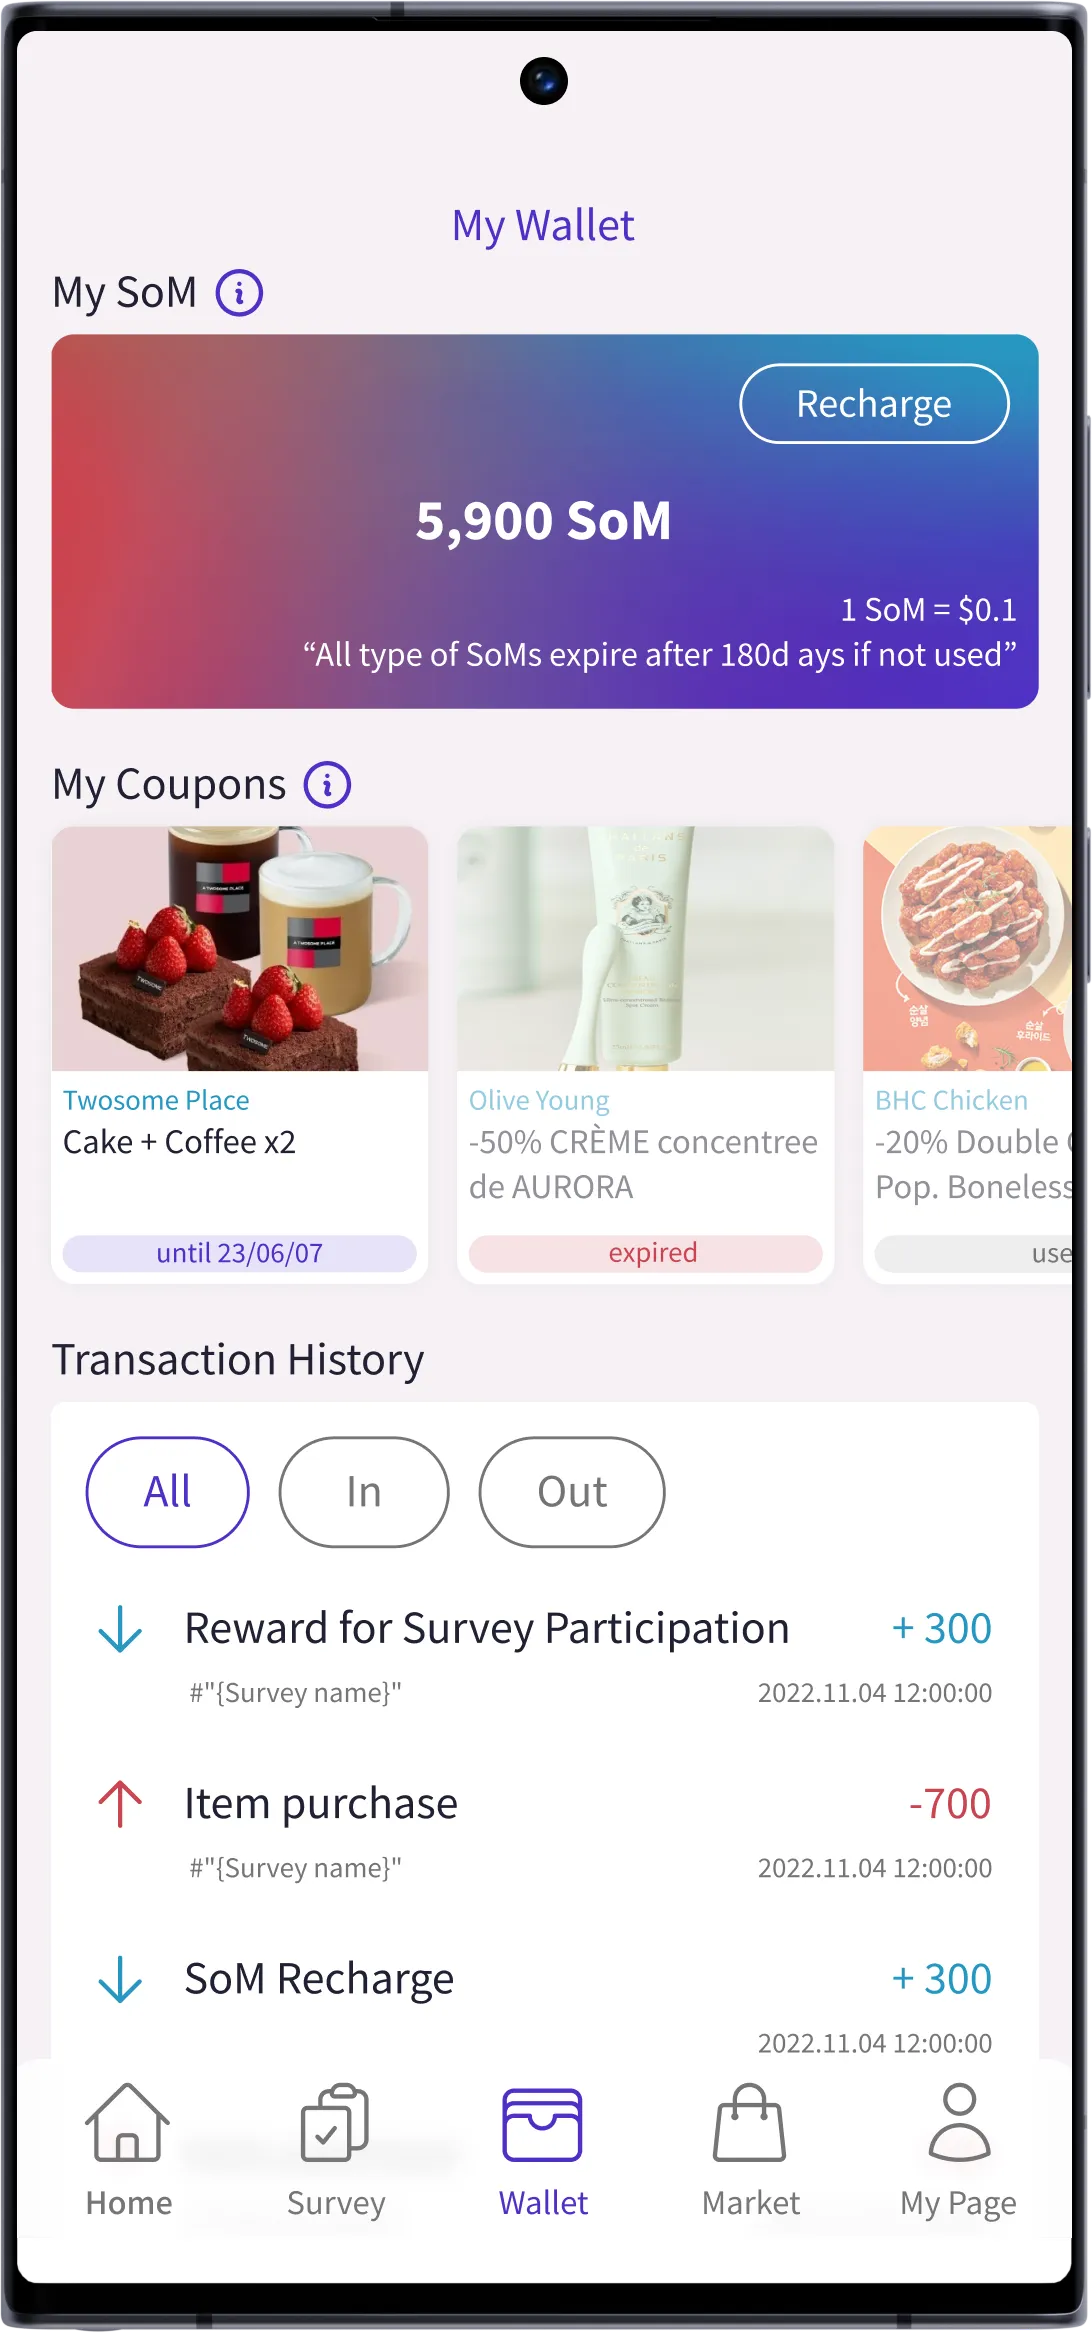 FingeRate App Screenshot of My Wallet page, showing amount of SoM points and coupons